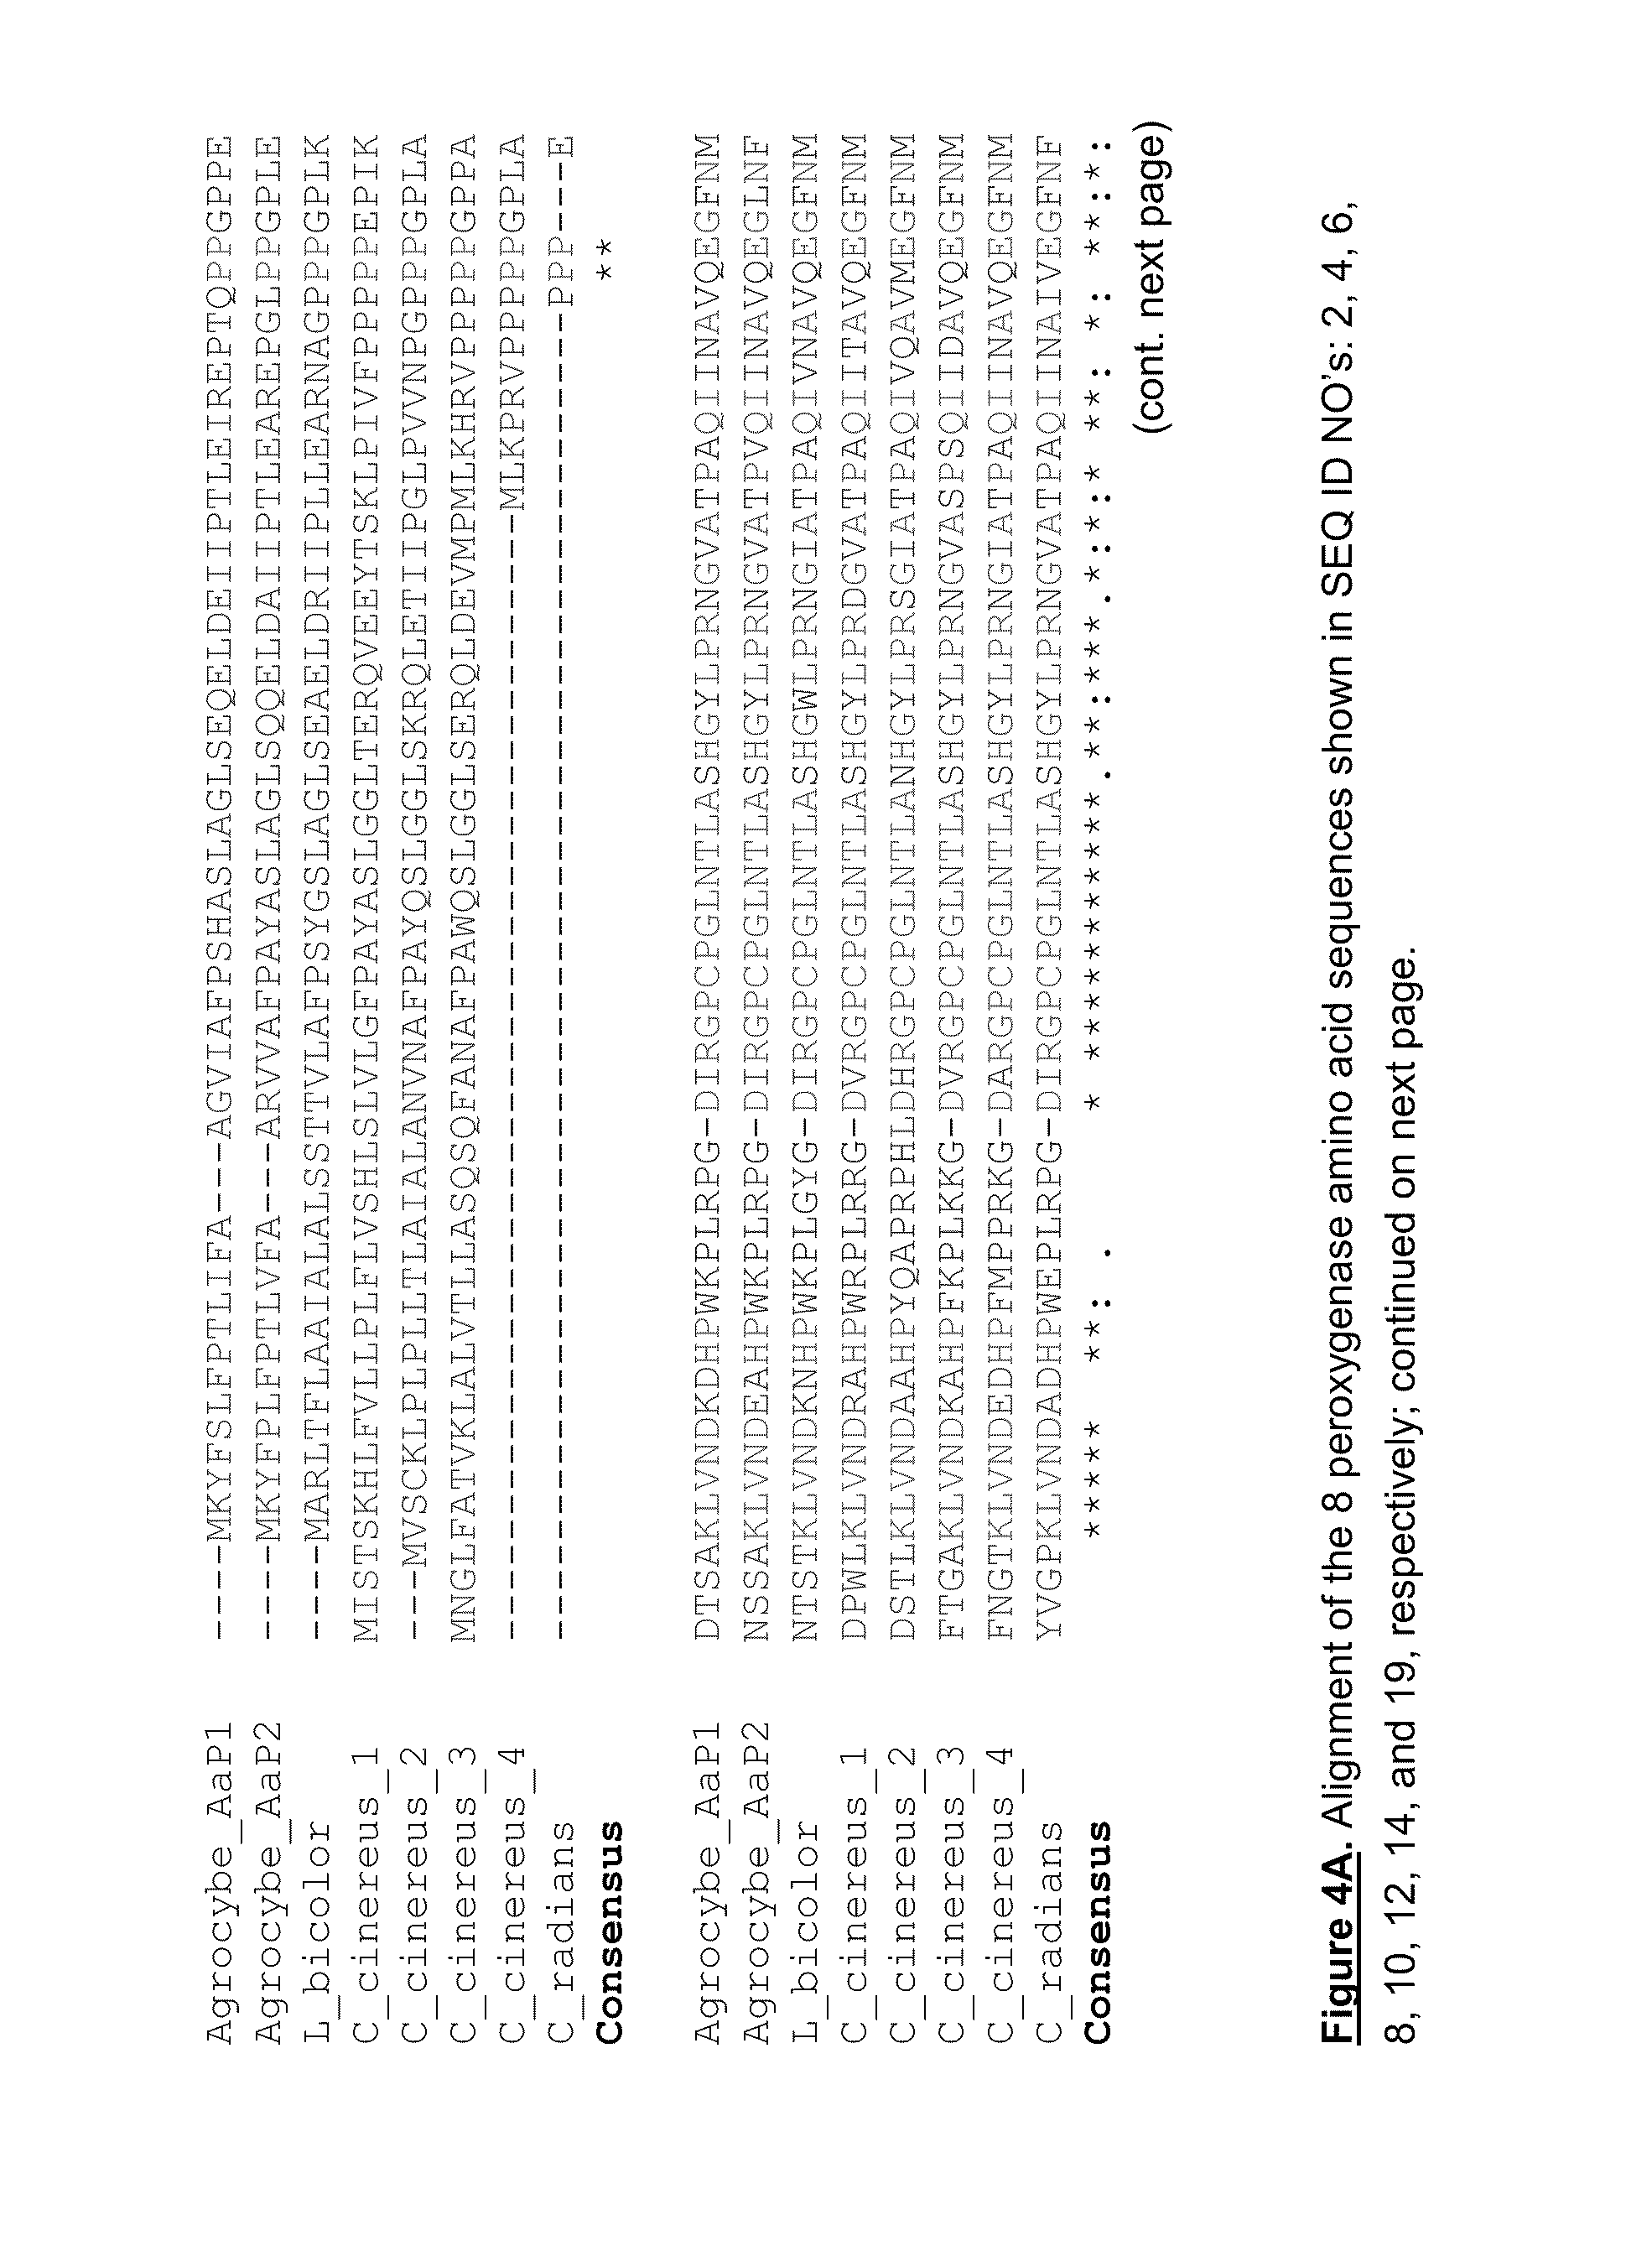 Fungal peroxygenases and methods of application